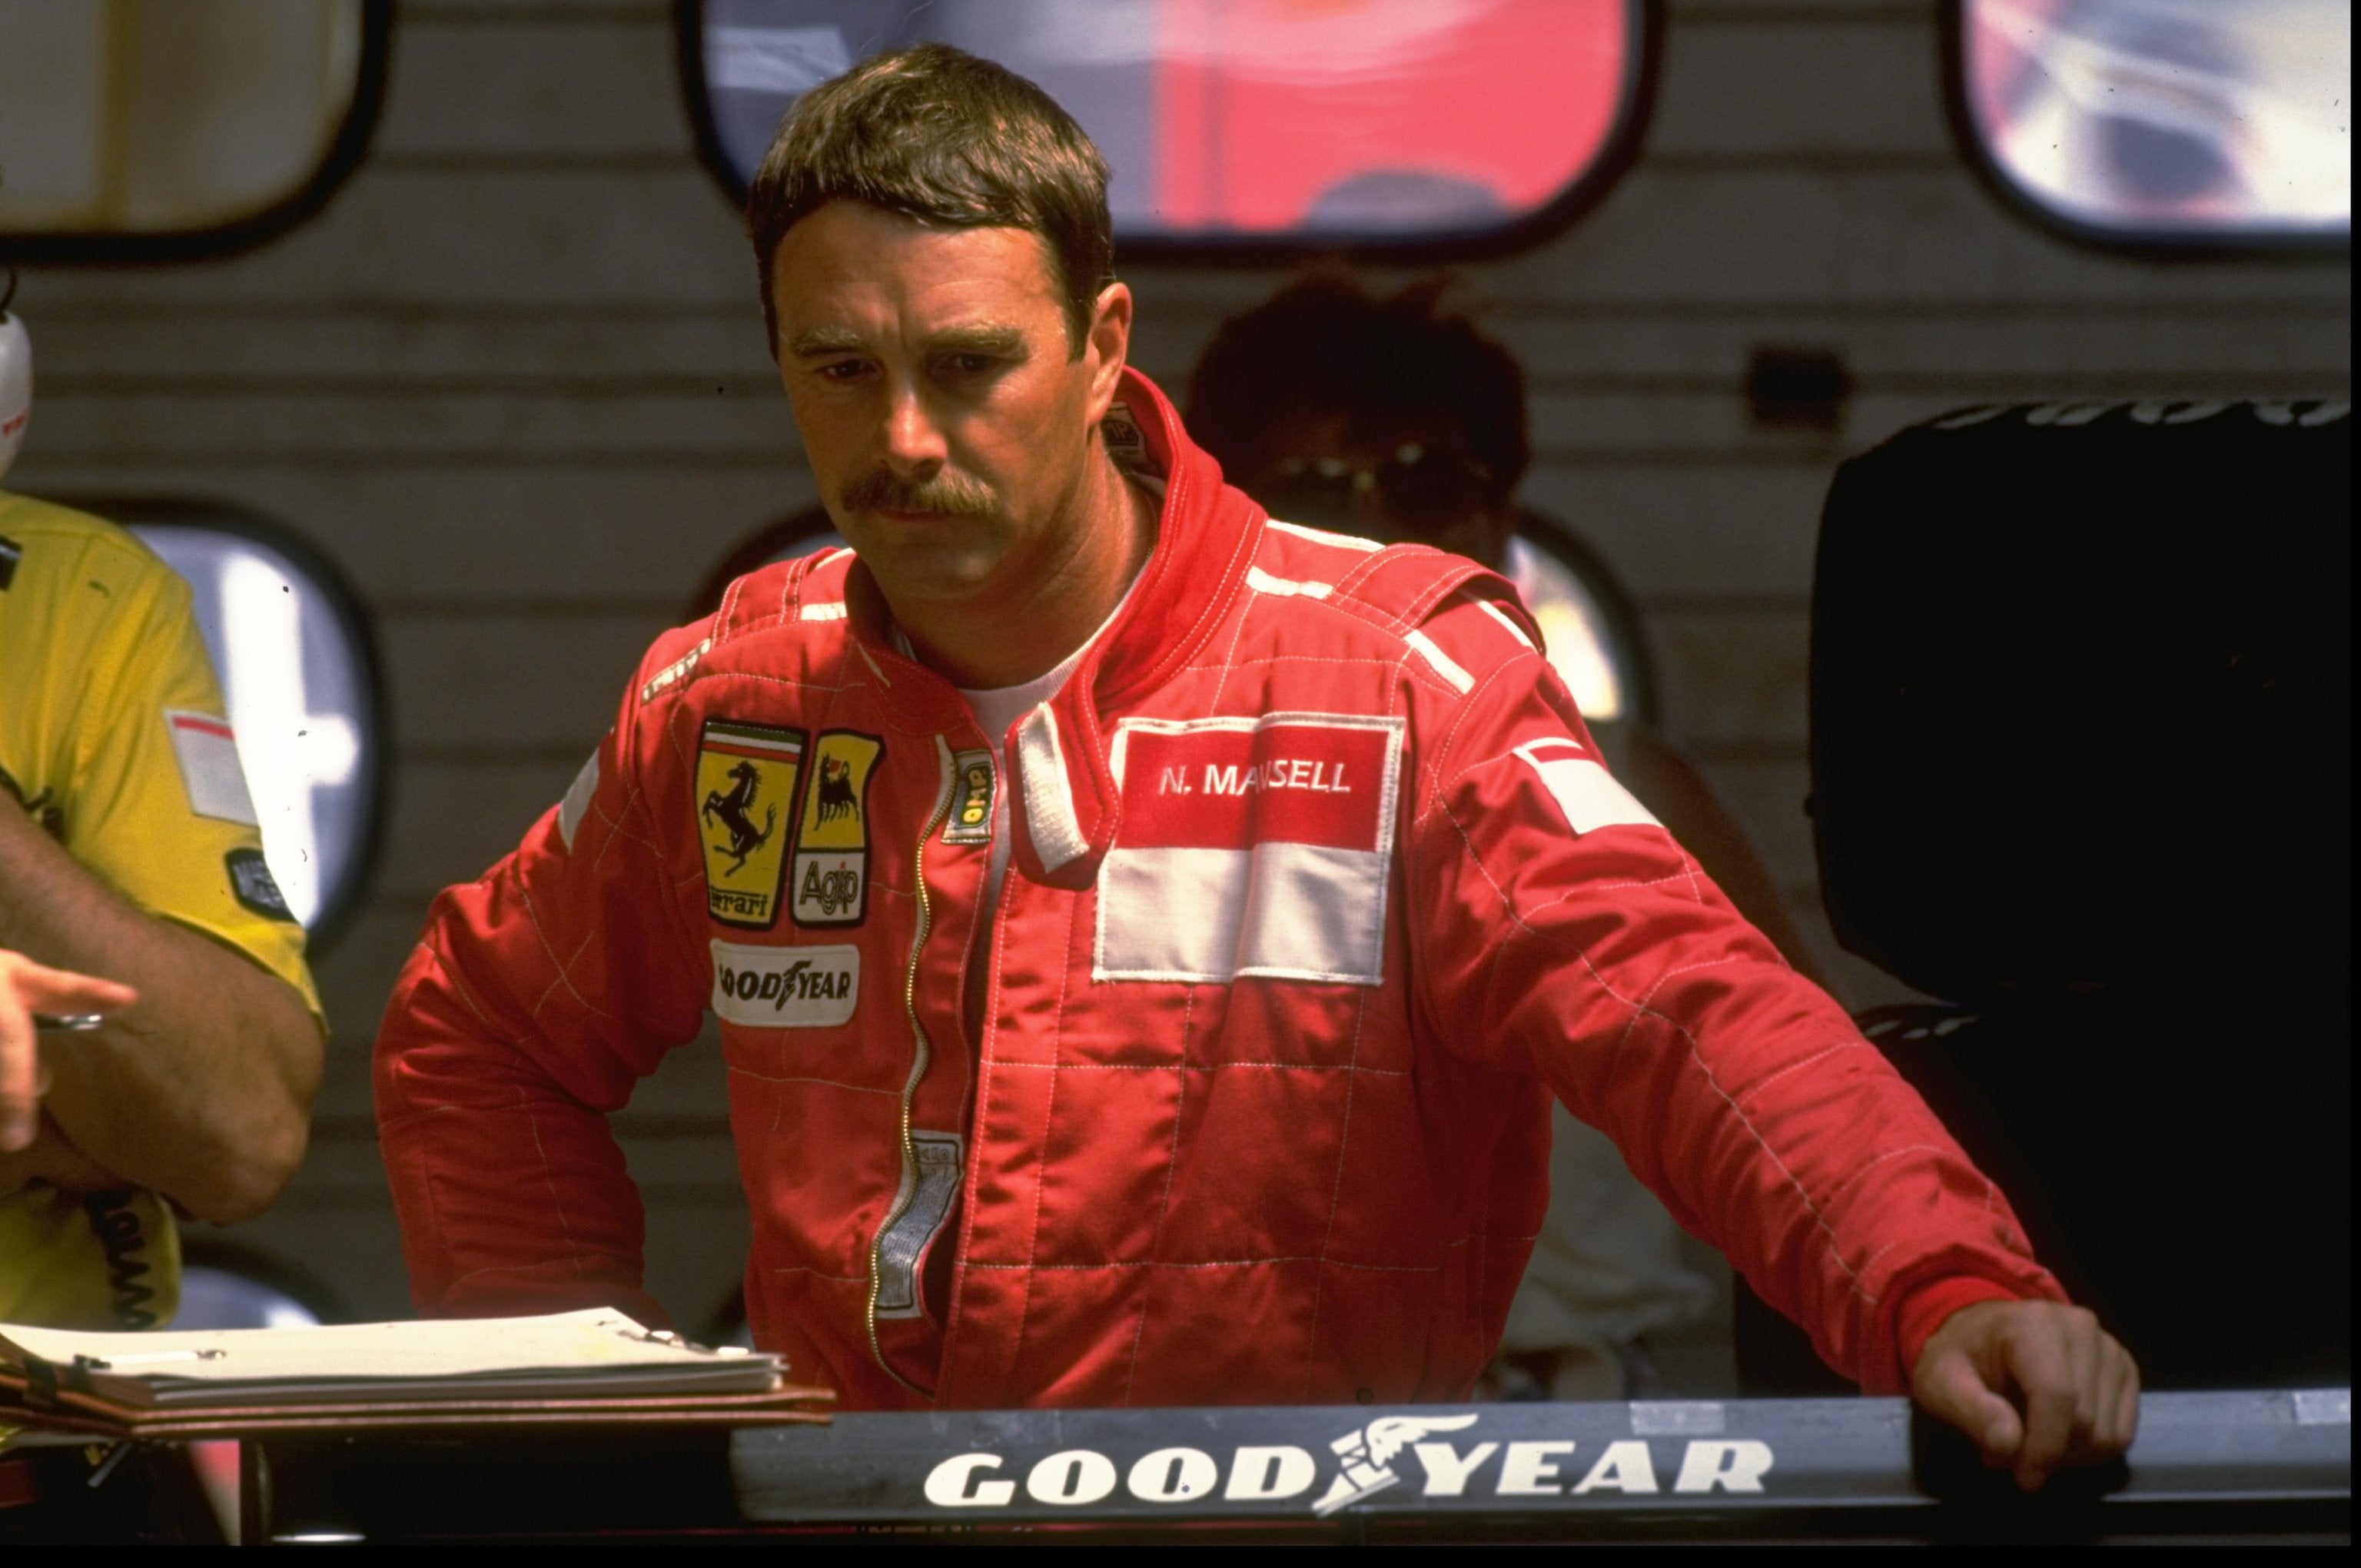 Mansell was the last English driver with a full-time seat at Ferrari